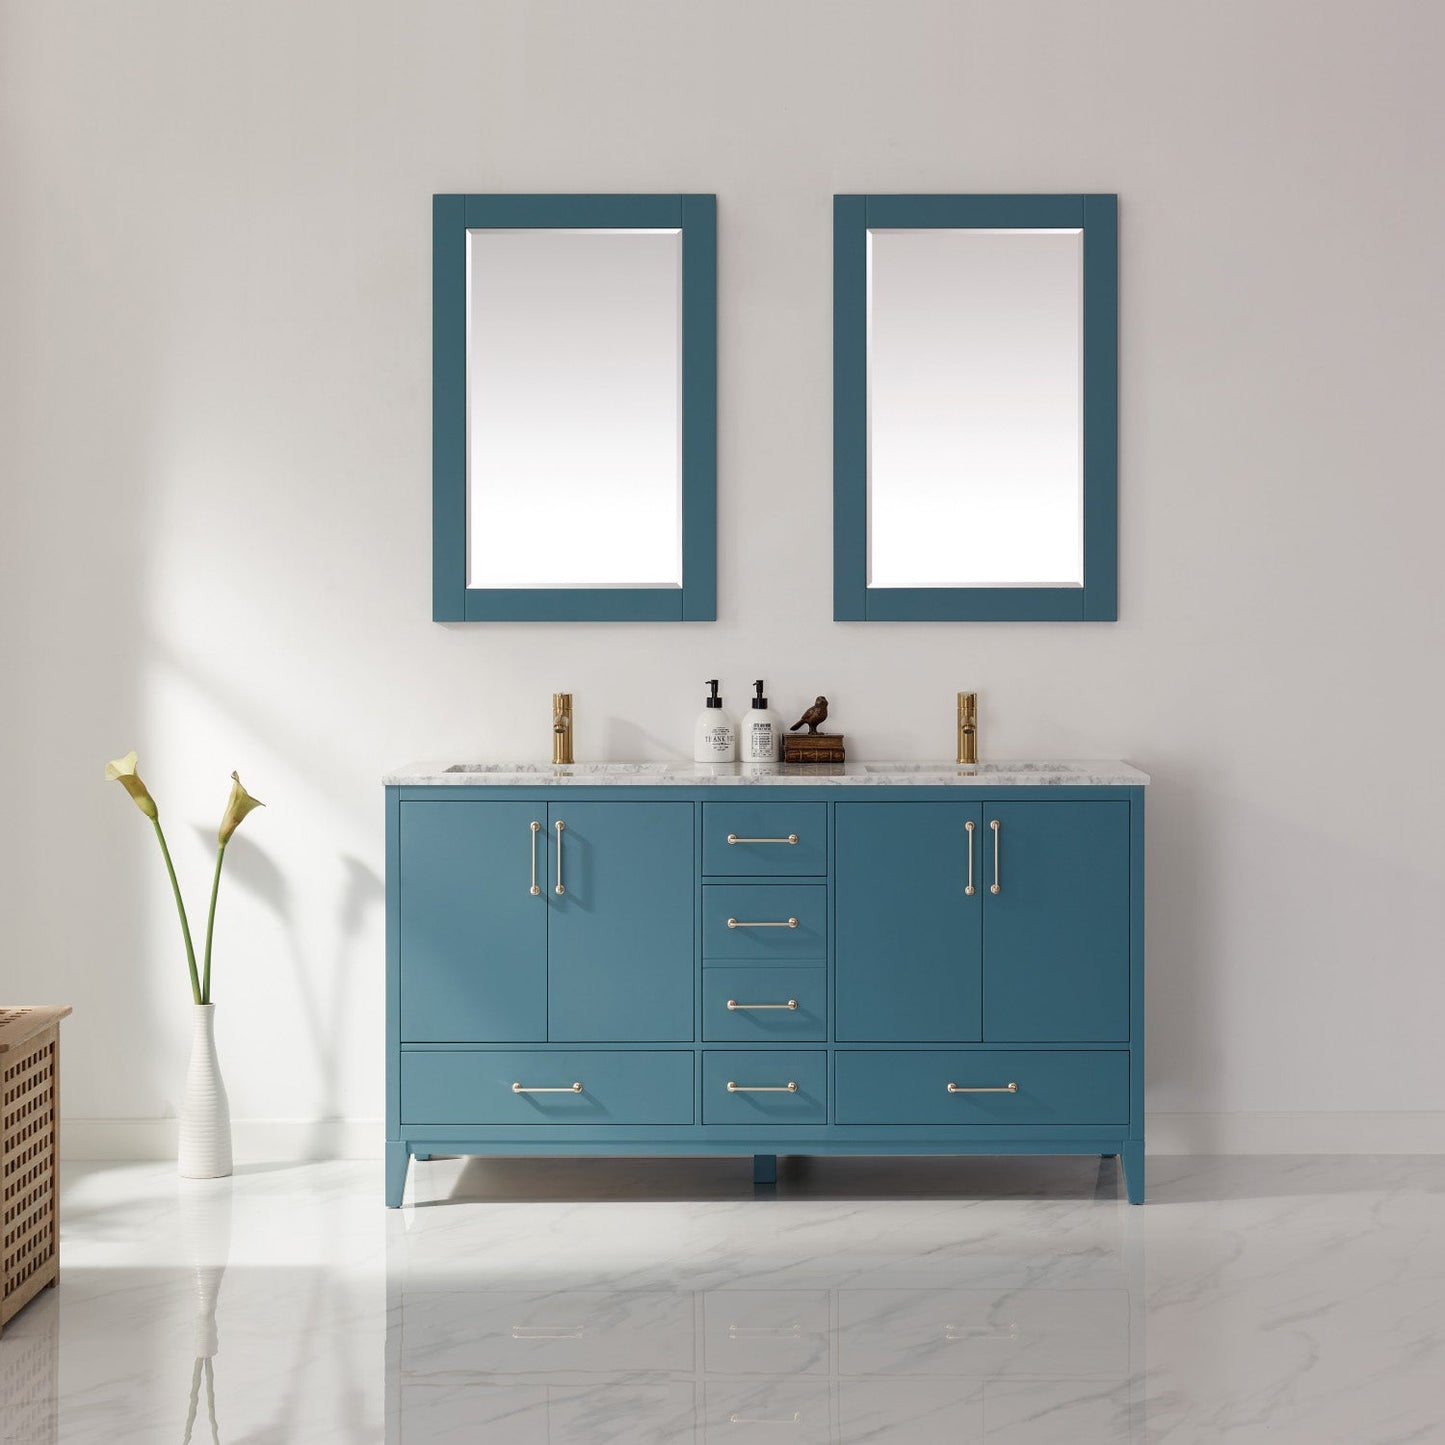 Sutton 60" Double Bathroom Vanity Set in Royal Green and Carrara White Marble Countertop with Mirror